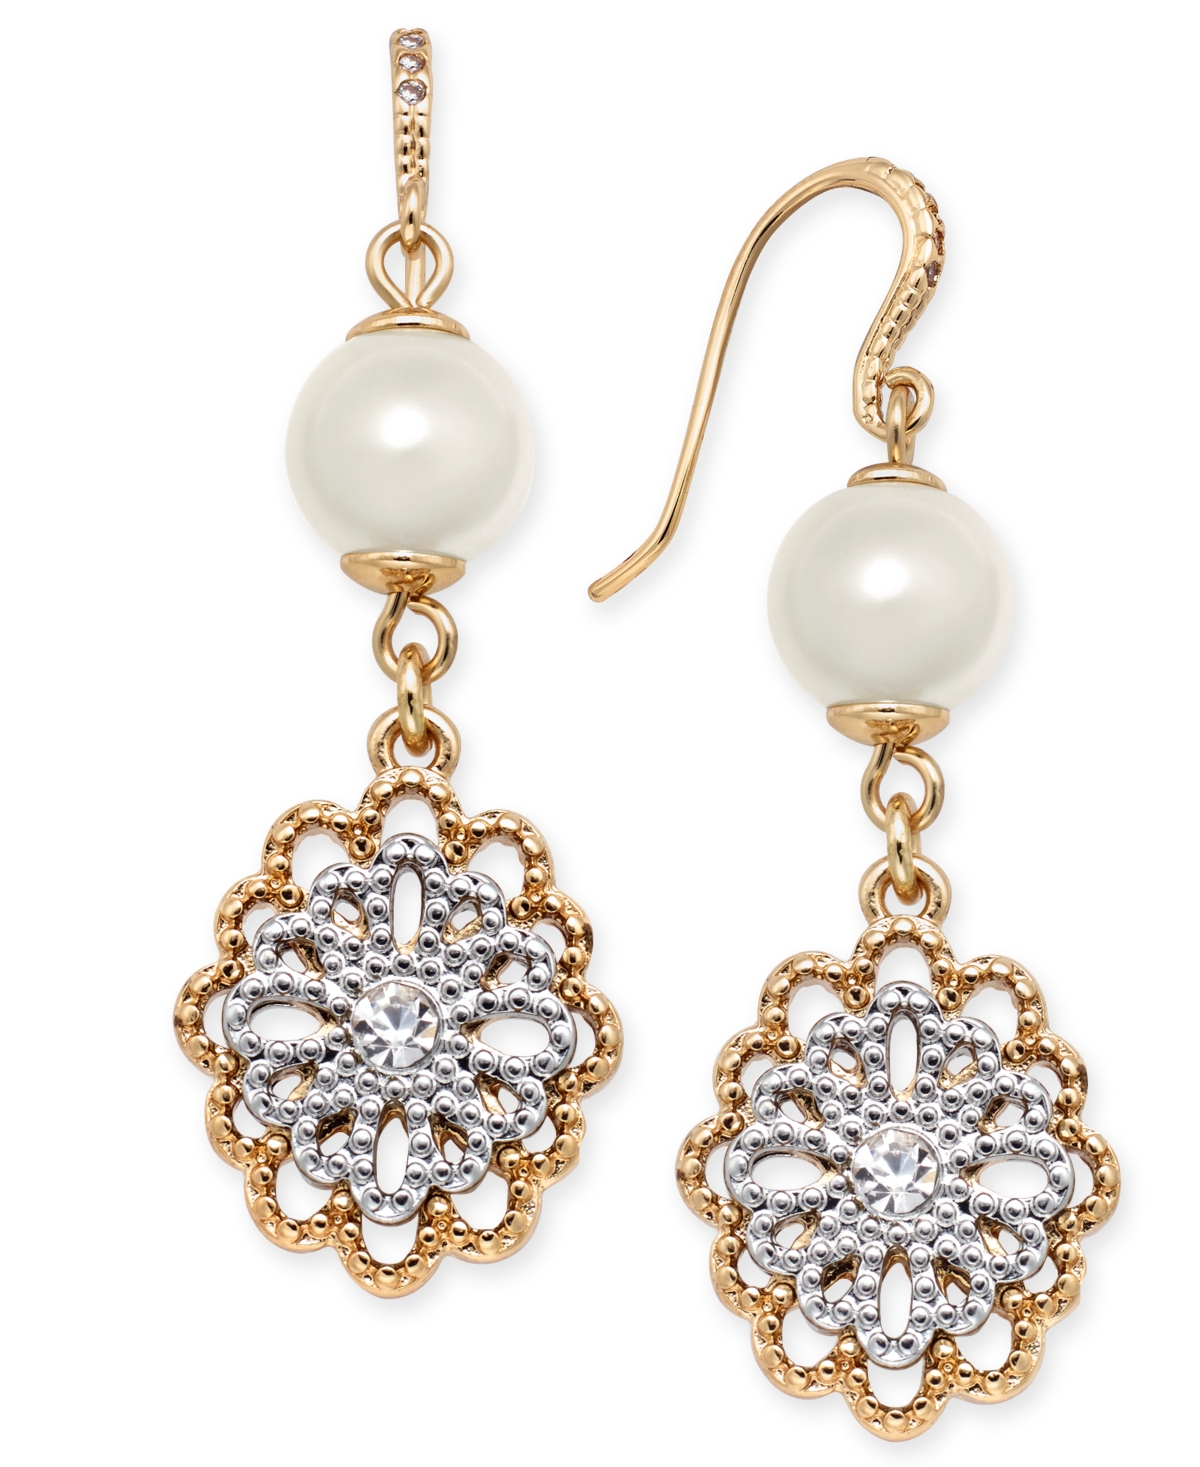 Two-Tone Crystal Filigree & Imitation Pearl Drop Earrings, Created for Macy's - Gold